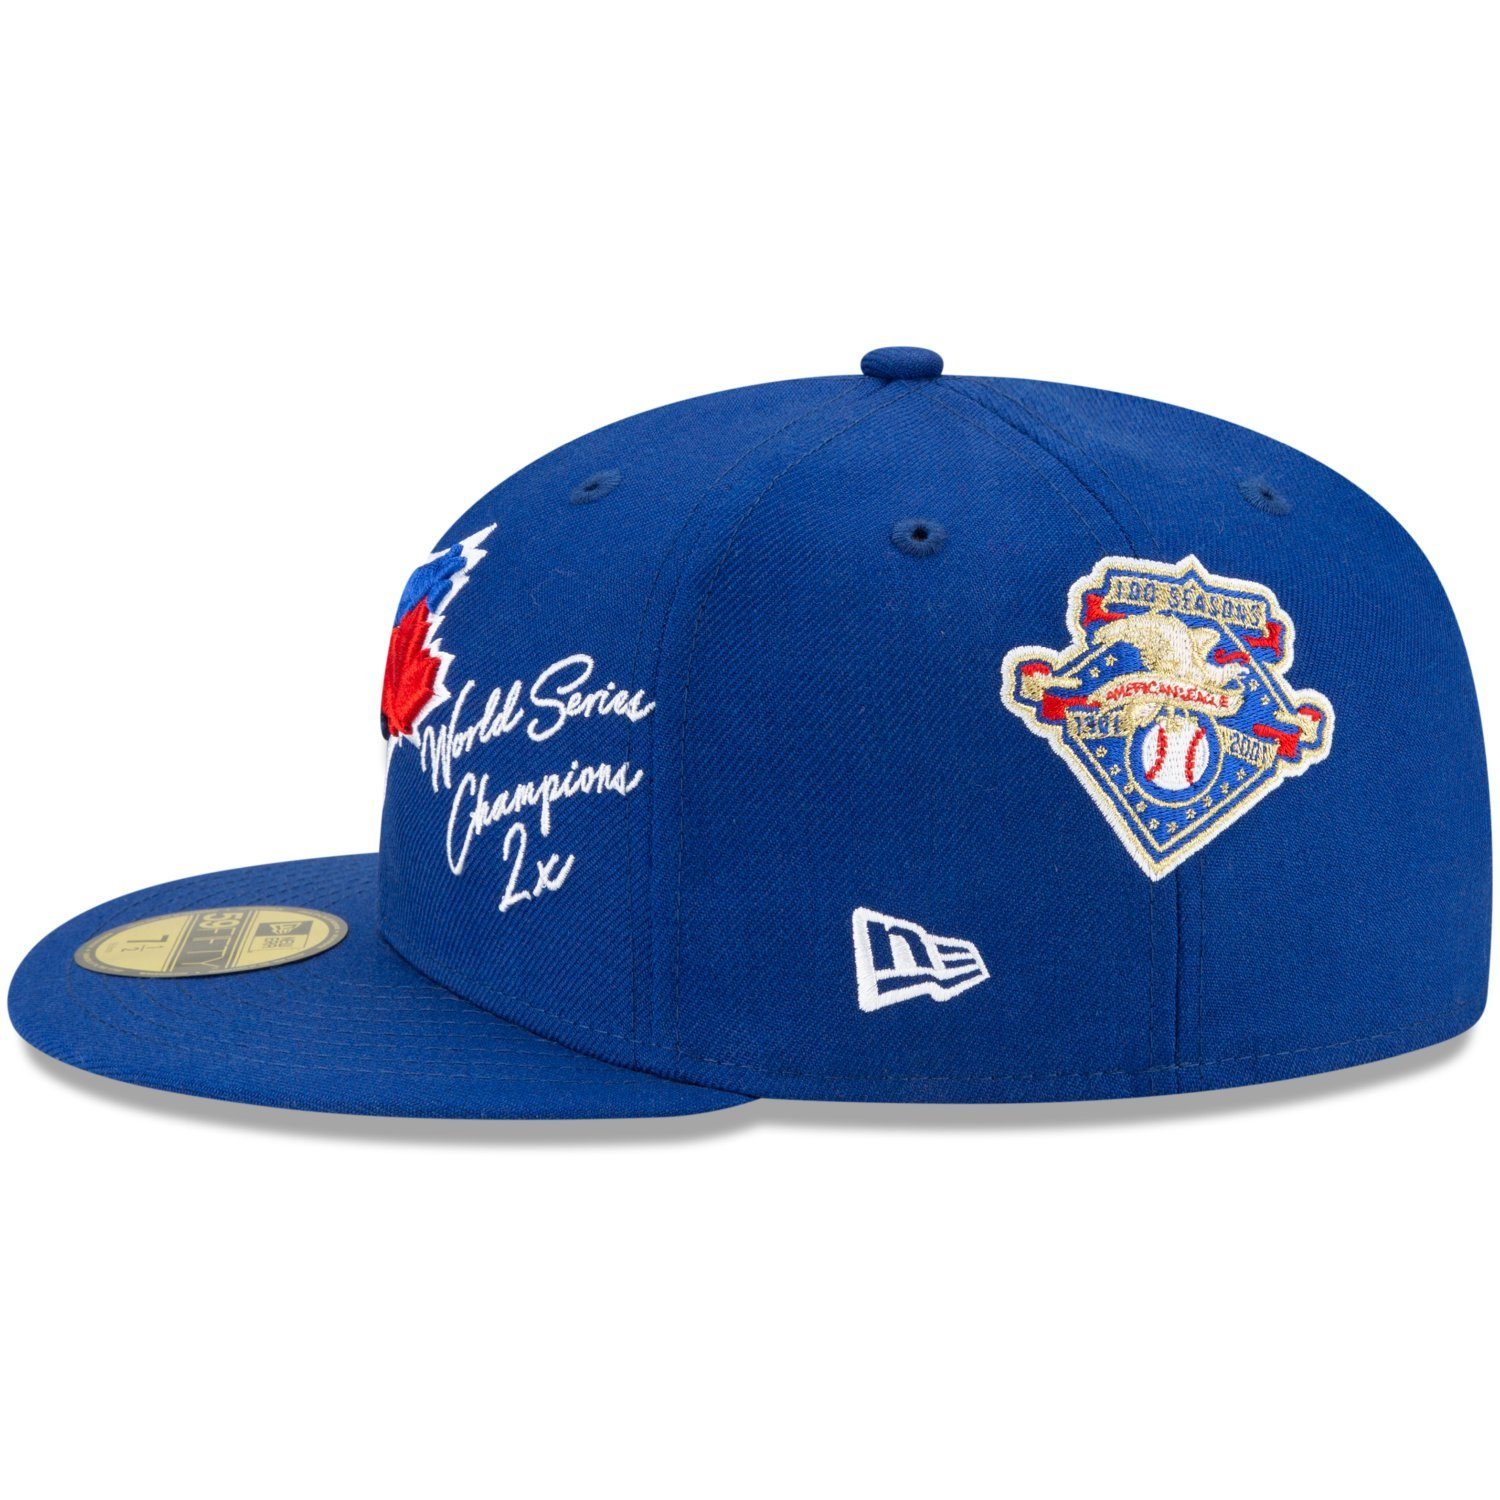 Era 59Fifty Cap GRAPHIC Toronto Jays Fitted New